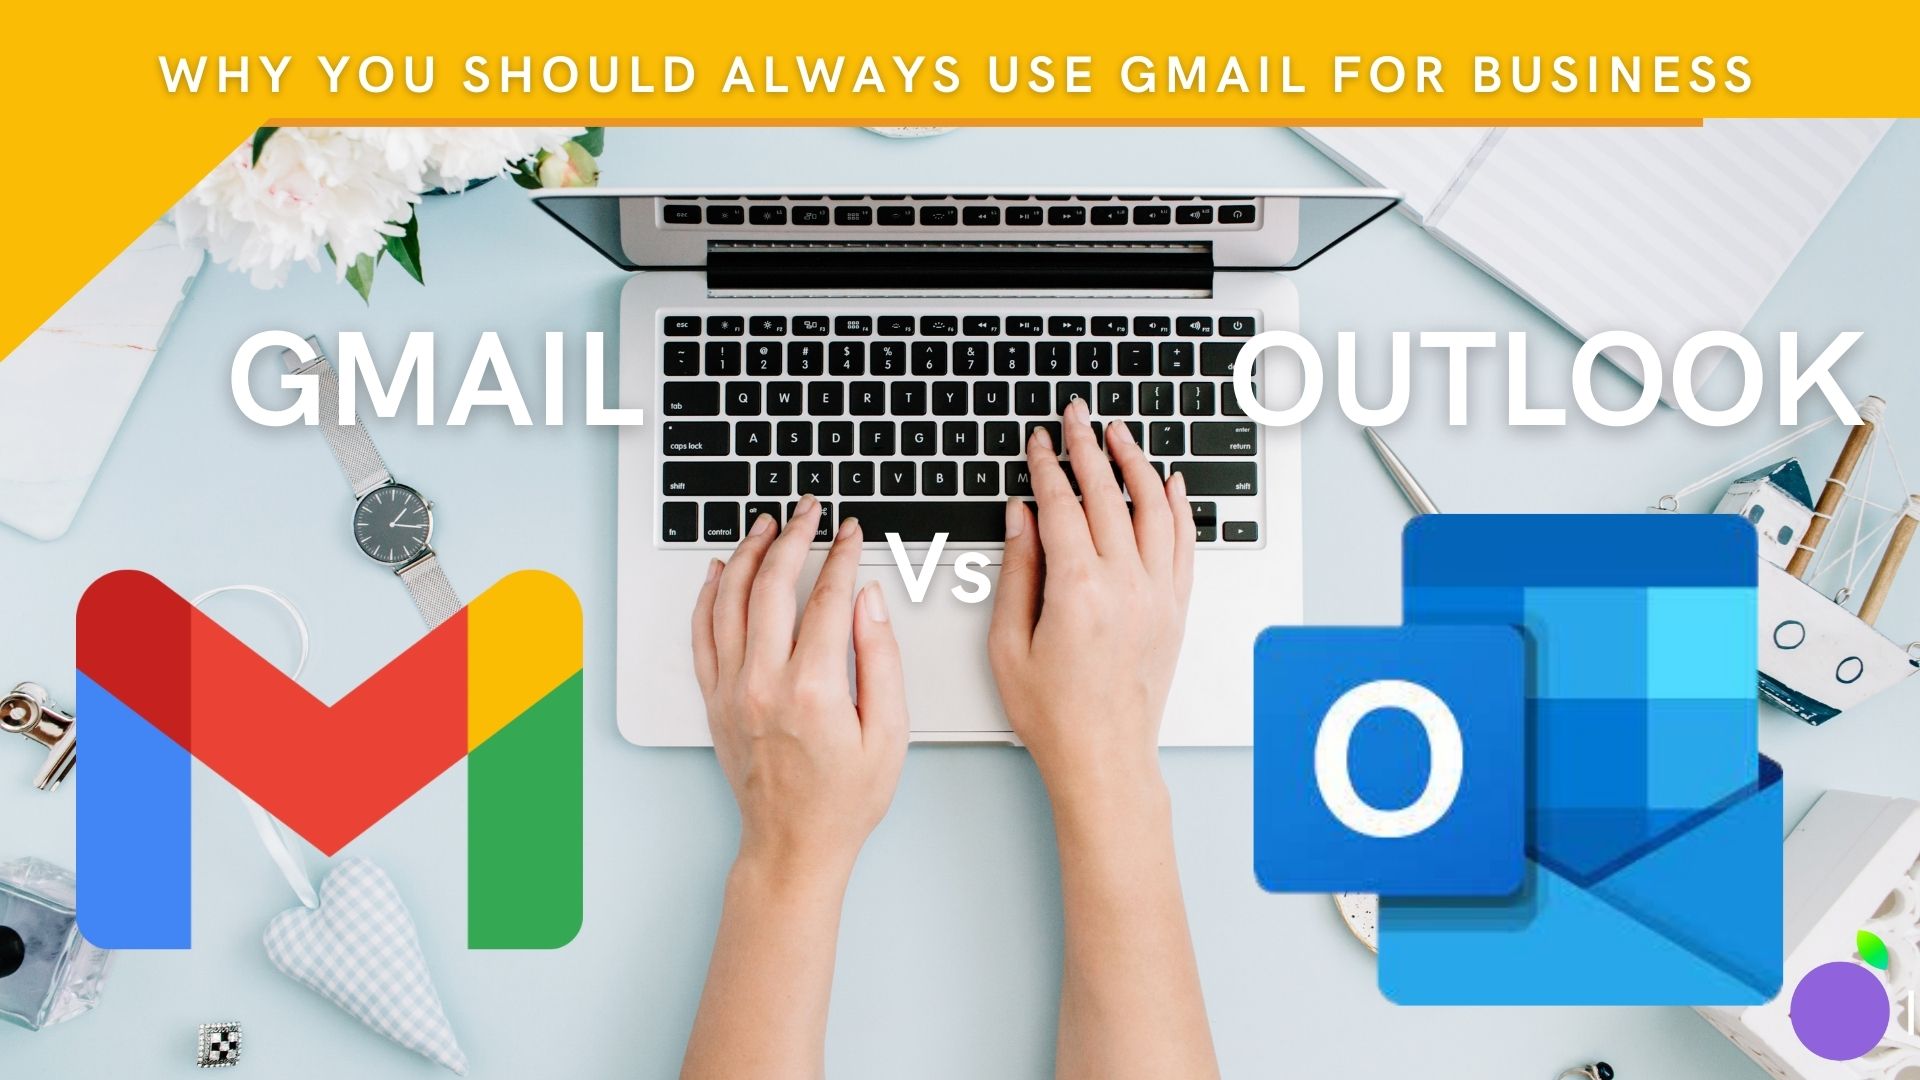 Gmail Vs Outlook: Which Is Better For Business?